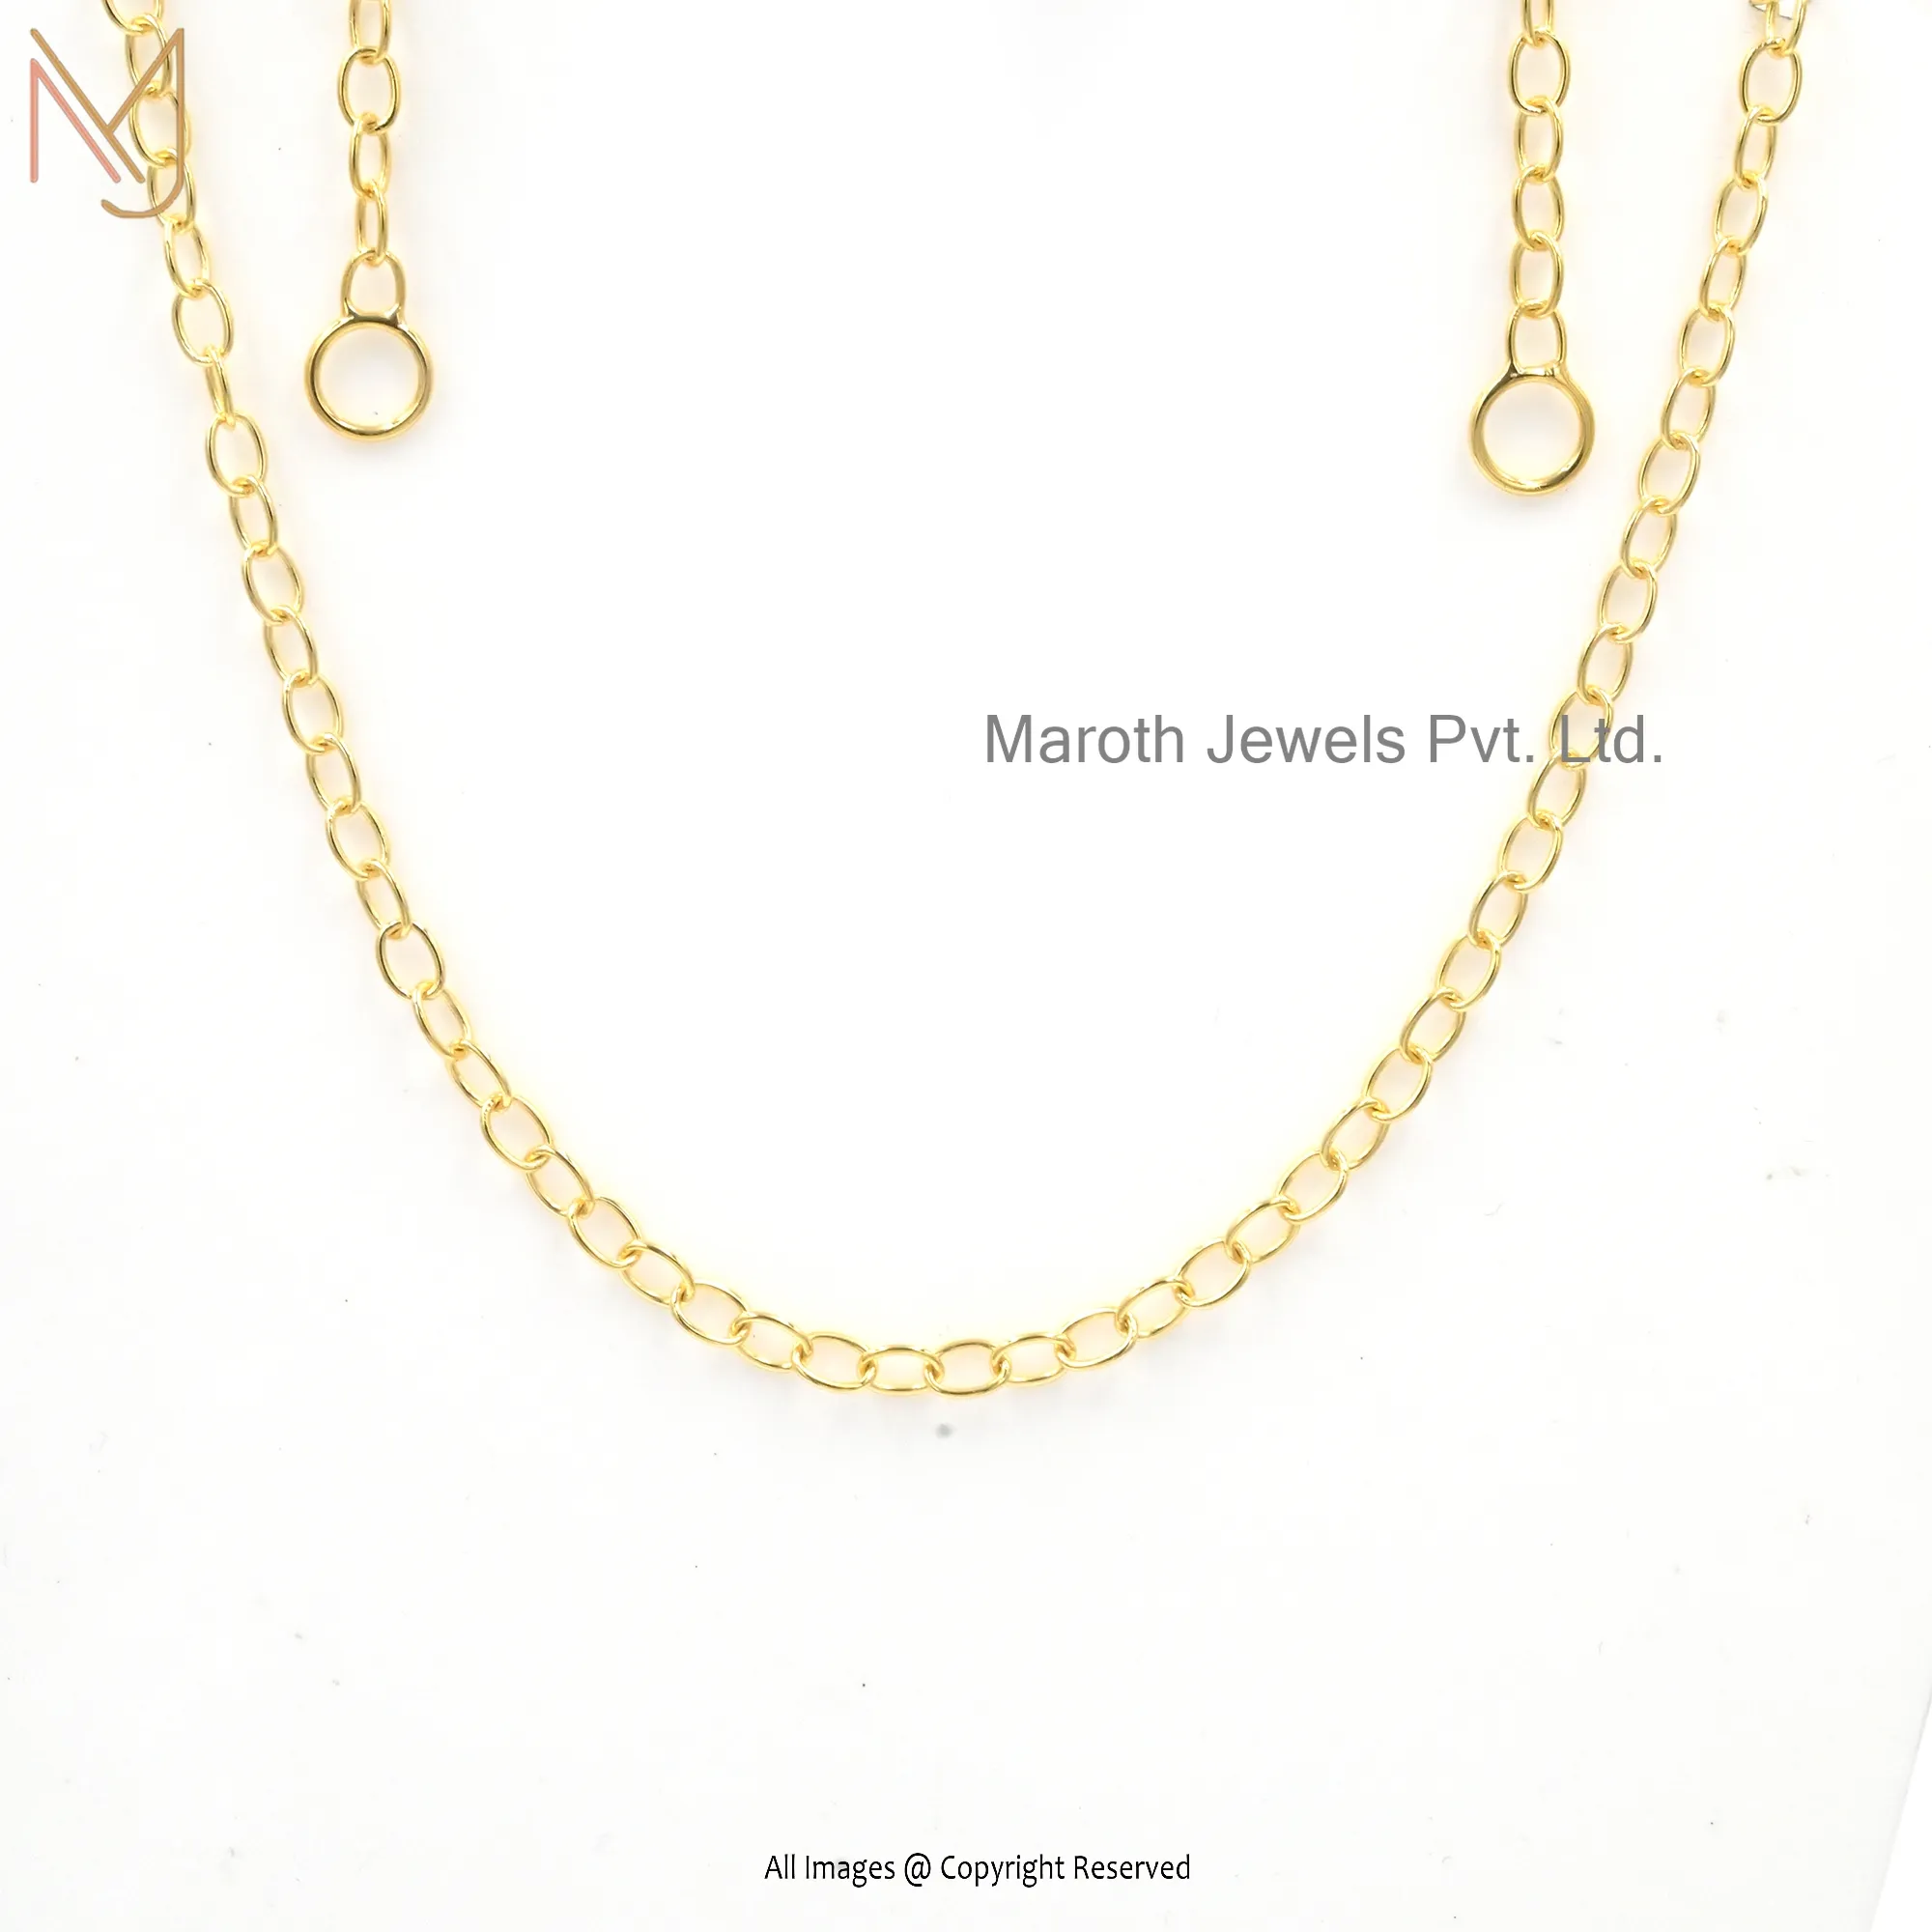 Private Label 925 Silver Yellow Gold Plated Oval Link Chain